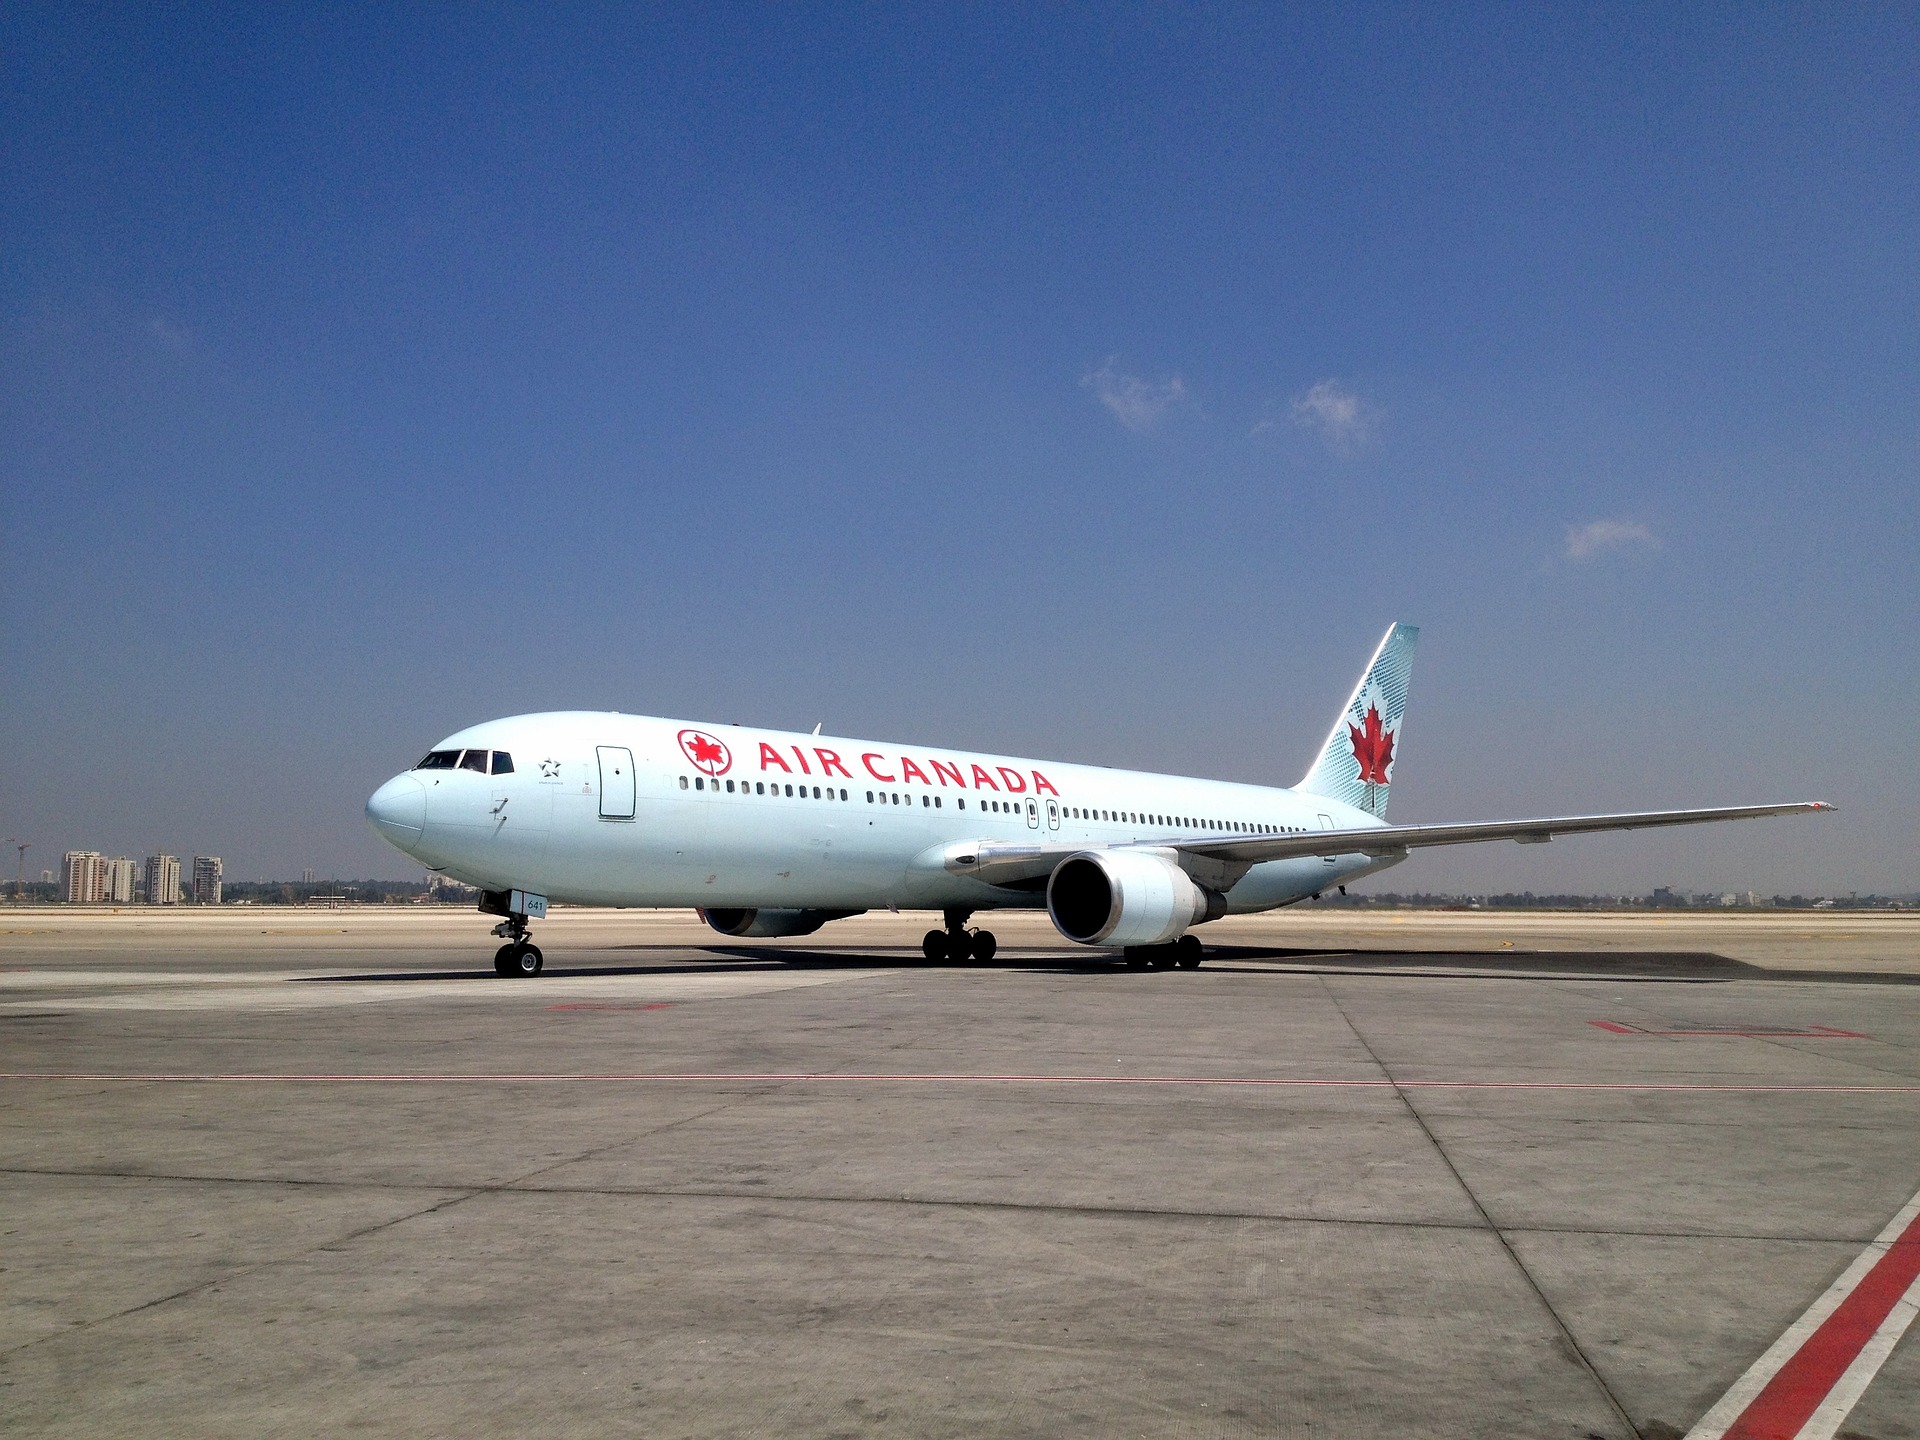 Flying with Air Canada? Here's what you need to know about their policy so that you can bring your portable oxygen concentrator on your next flight.